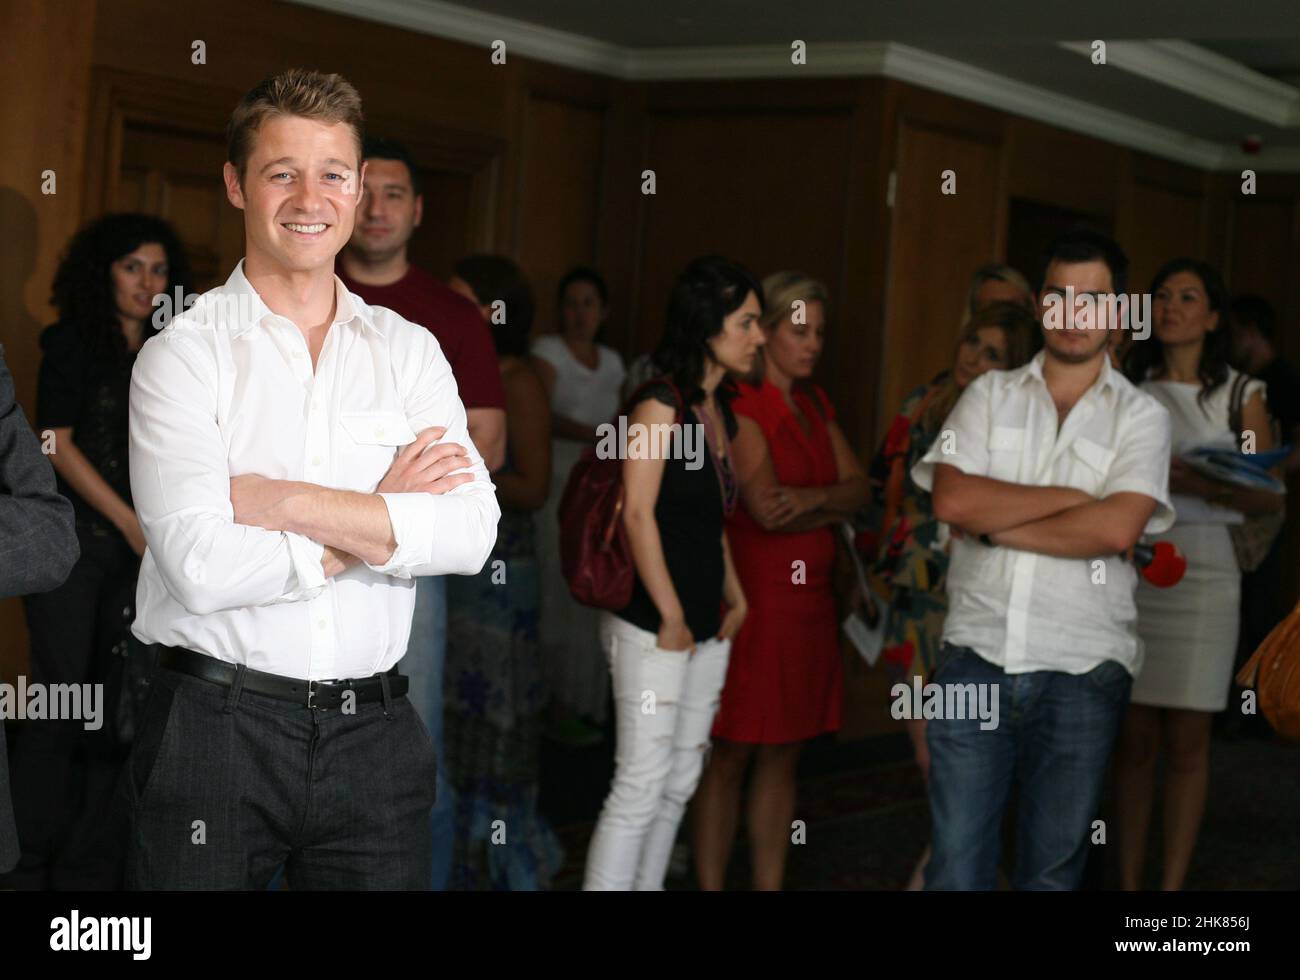 ISTANBUL, TURKEY - JUNE 17: Famous American actor and producer Benjamin McKenzie on June 17, 2010 in Istanbul, Turkey. He is known for playing Ryan Atwood in the television series The O.C. Stock Photo